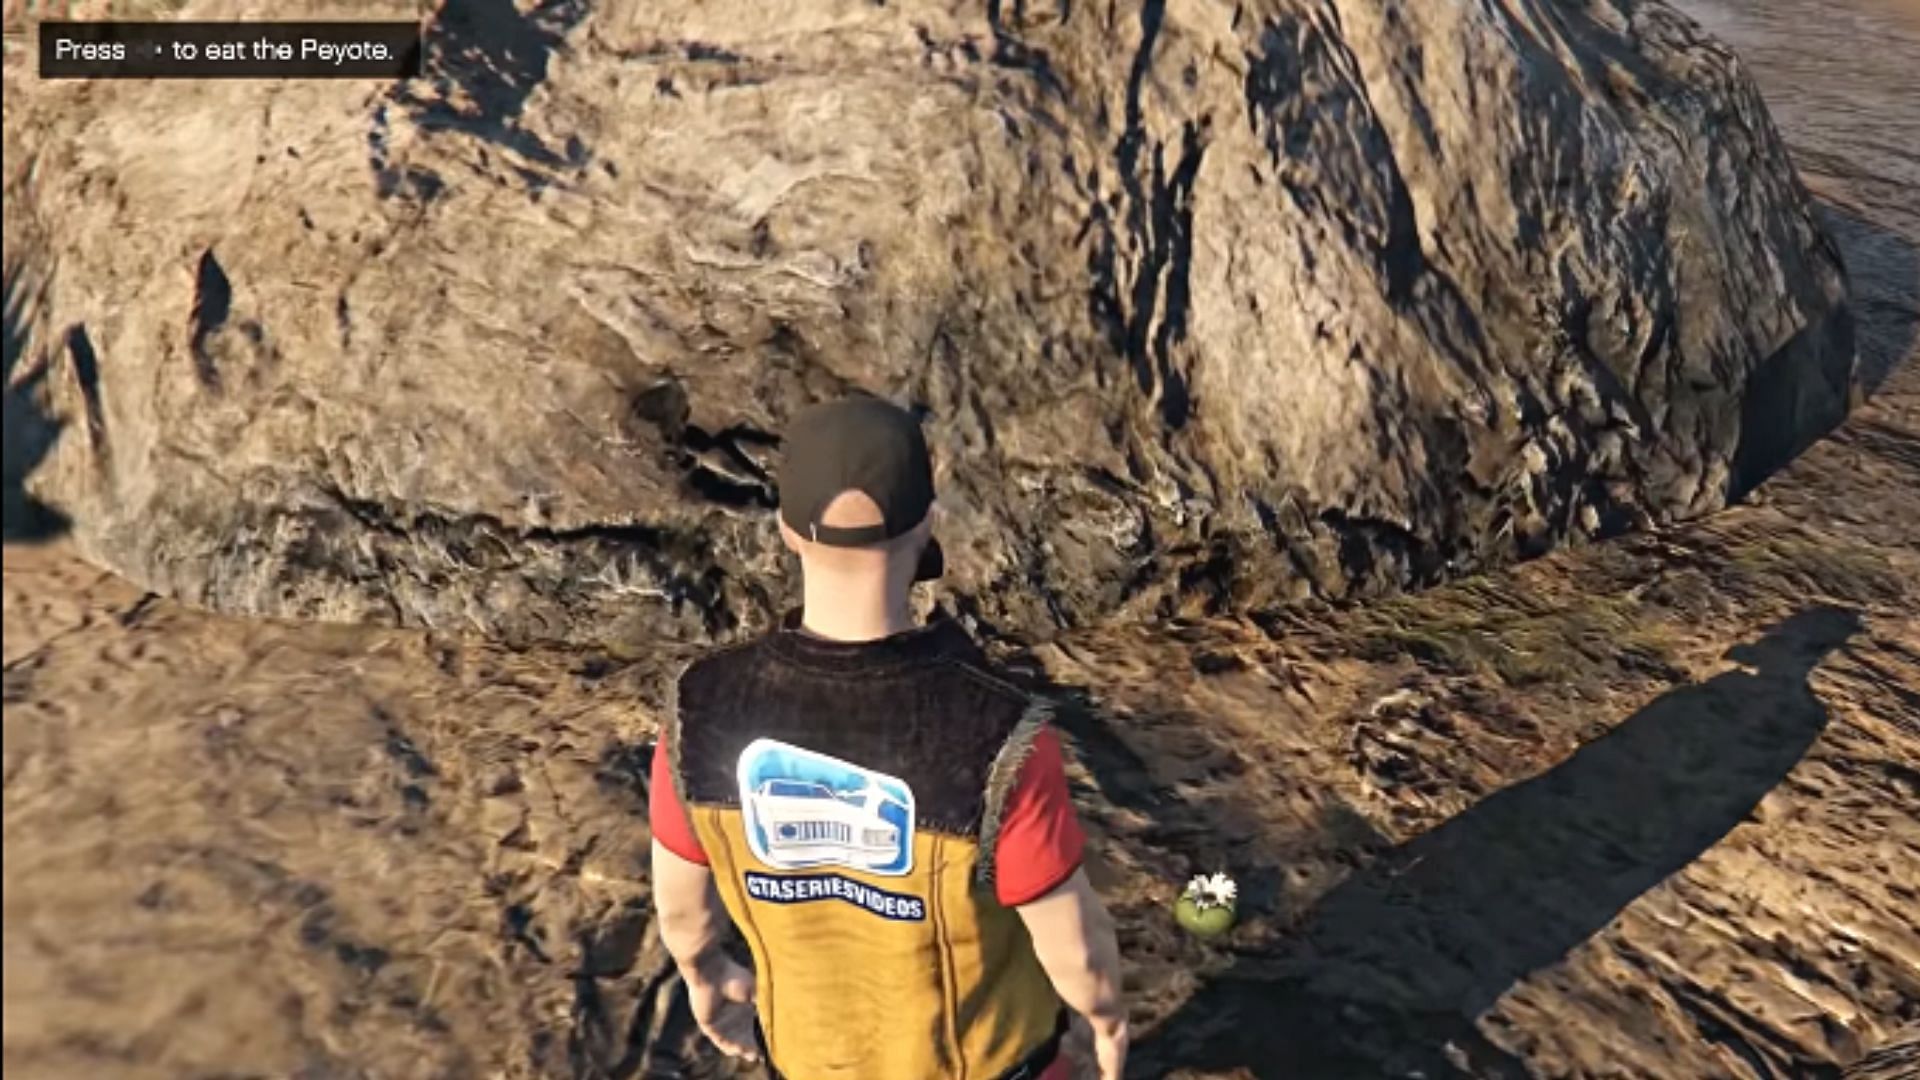 This is what a Peyote Plant looks like in the game (Image via YouTube/GTA Series Videos)